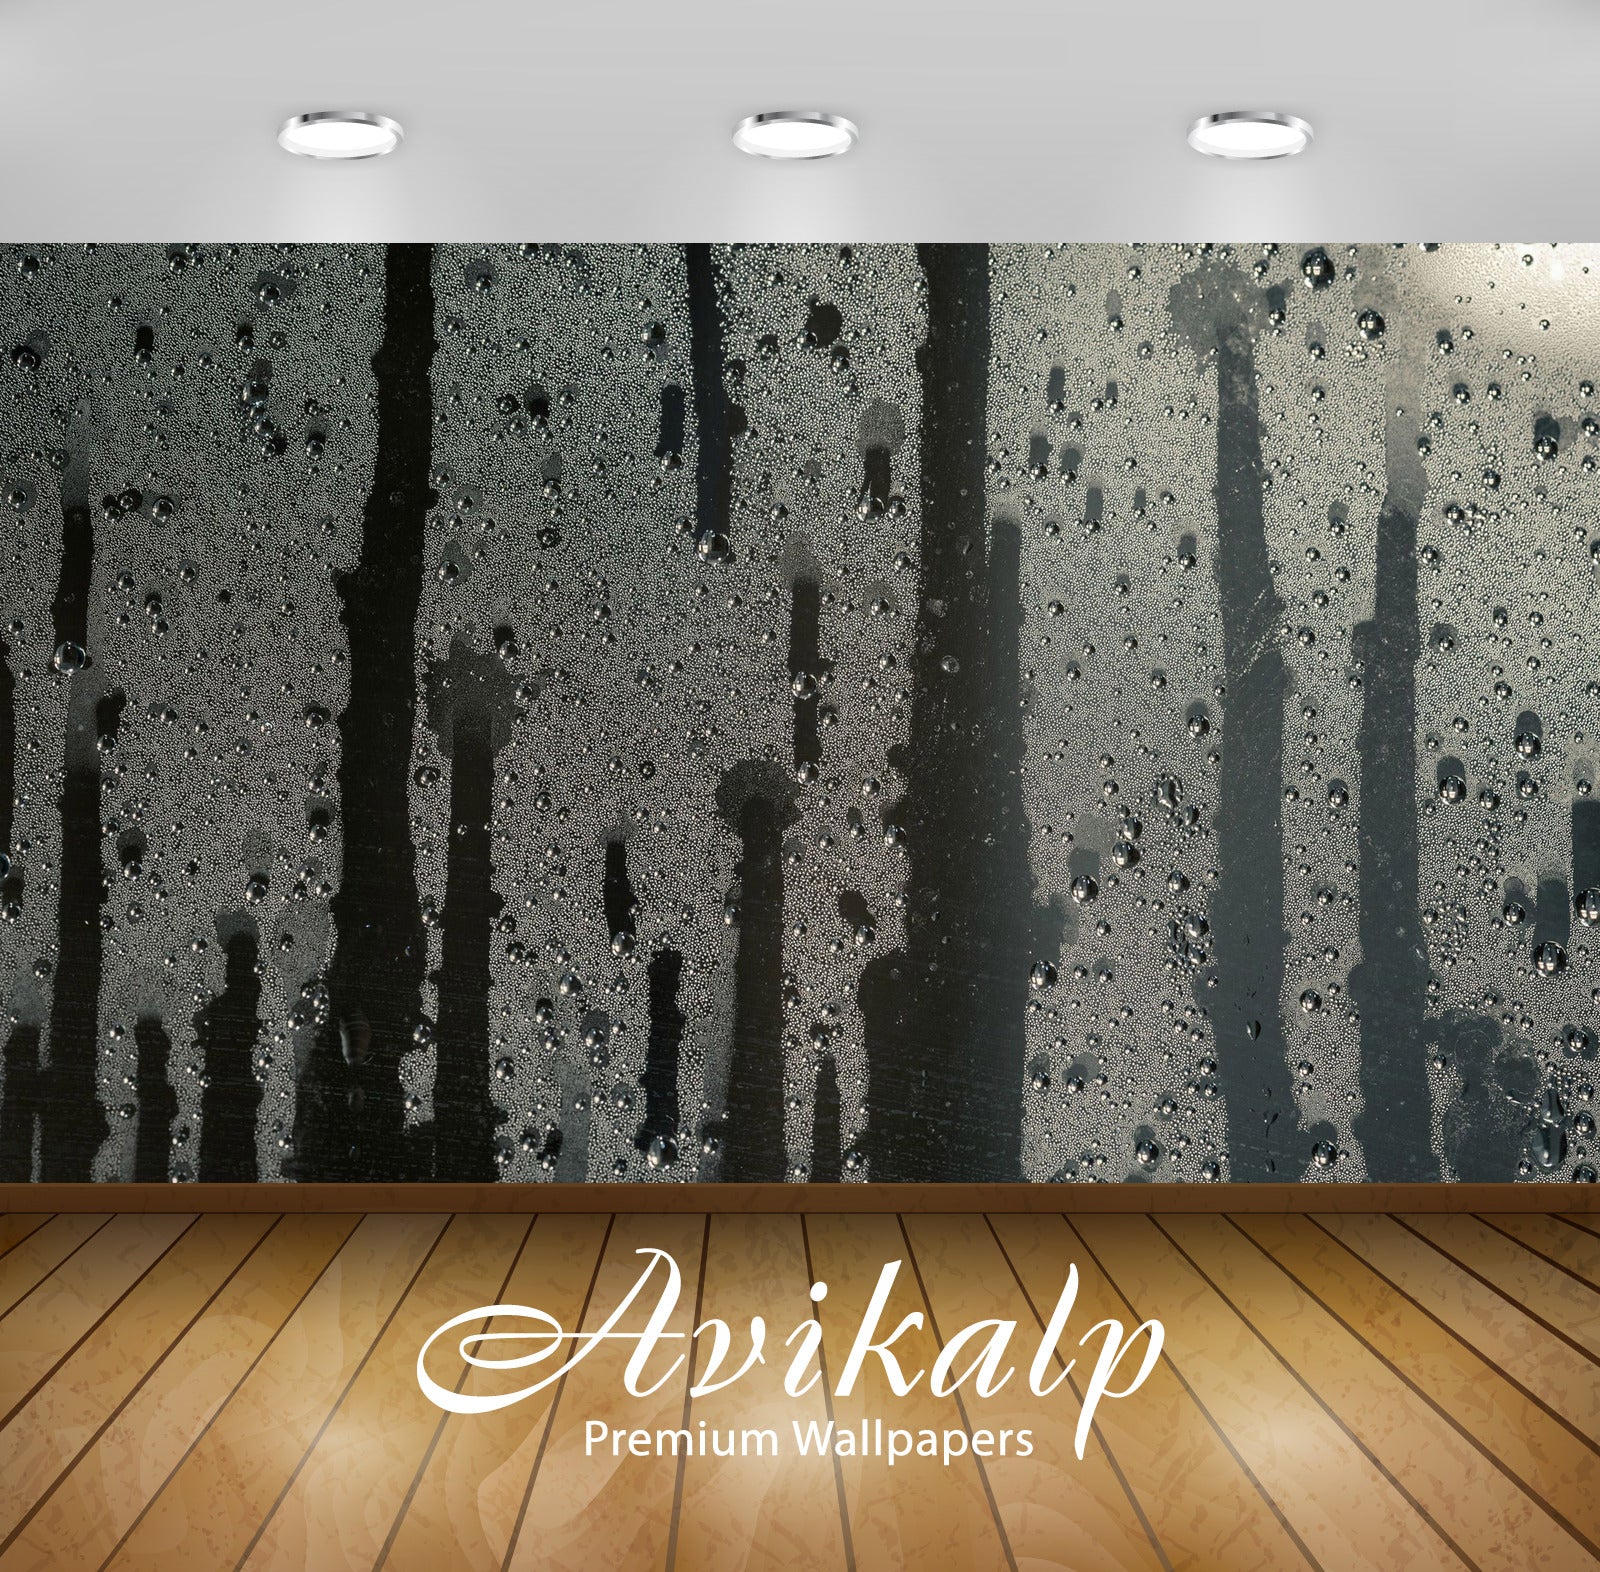 Avikalp Exclusive Awi4216 Condensation Full HD Wallpapers for Living room, Hall, Kids Room, Kitchen,